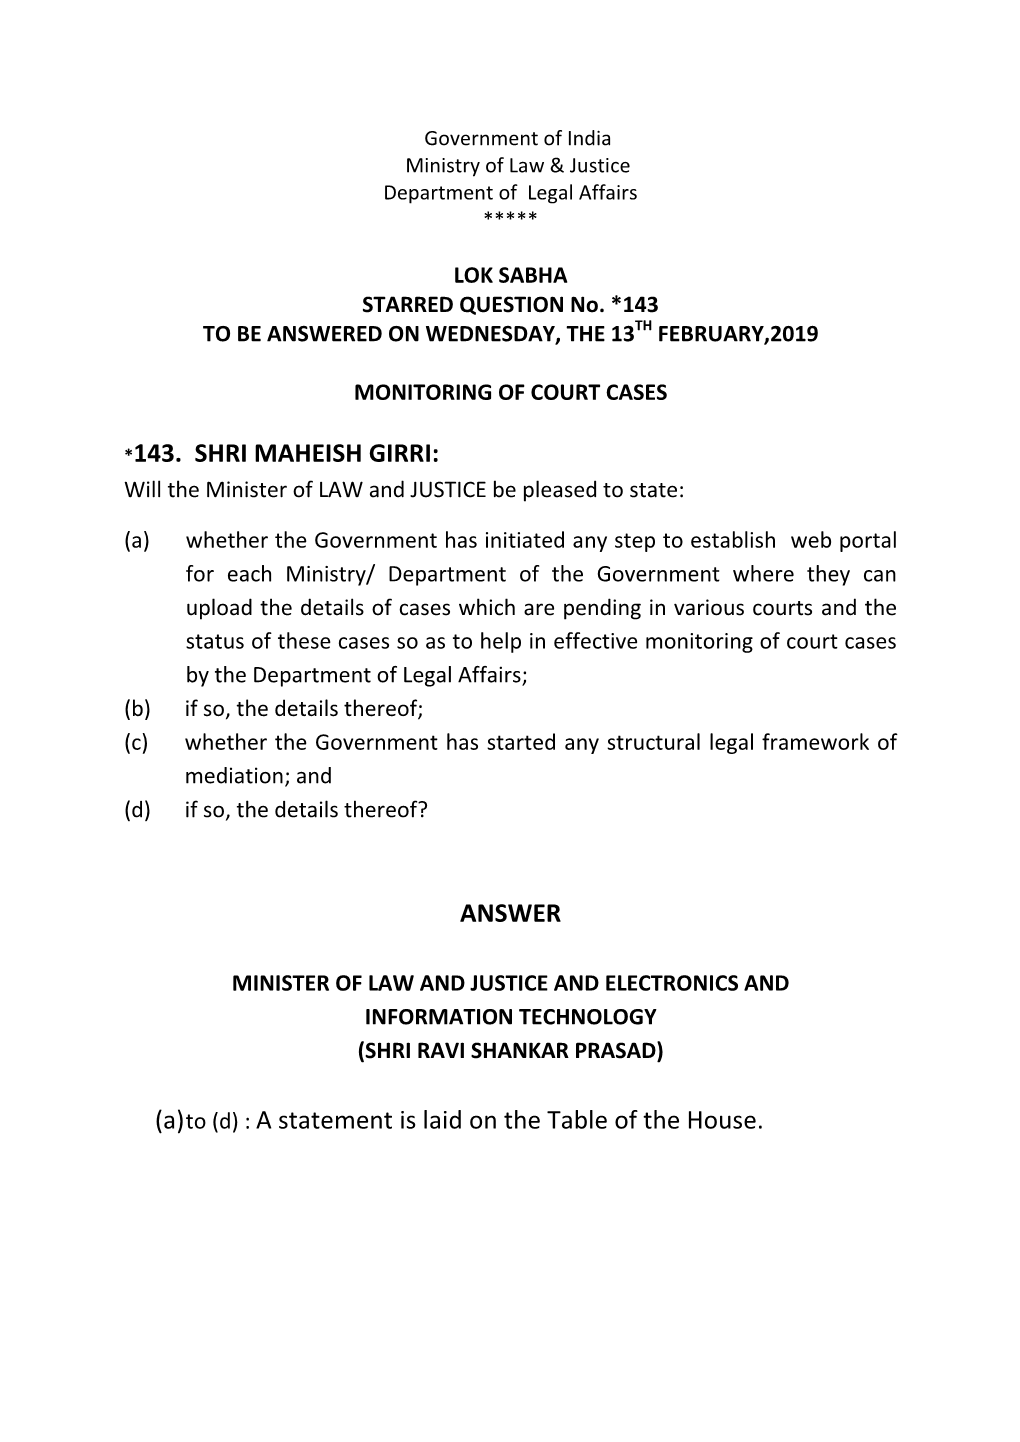 *143. SHRI MAHEISH GIRRI: ANSWER (A) to (D) : a Statement Is Laid on the Table of the House